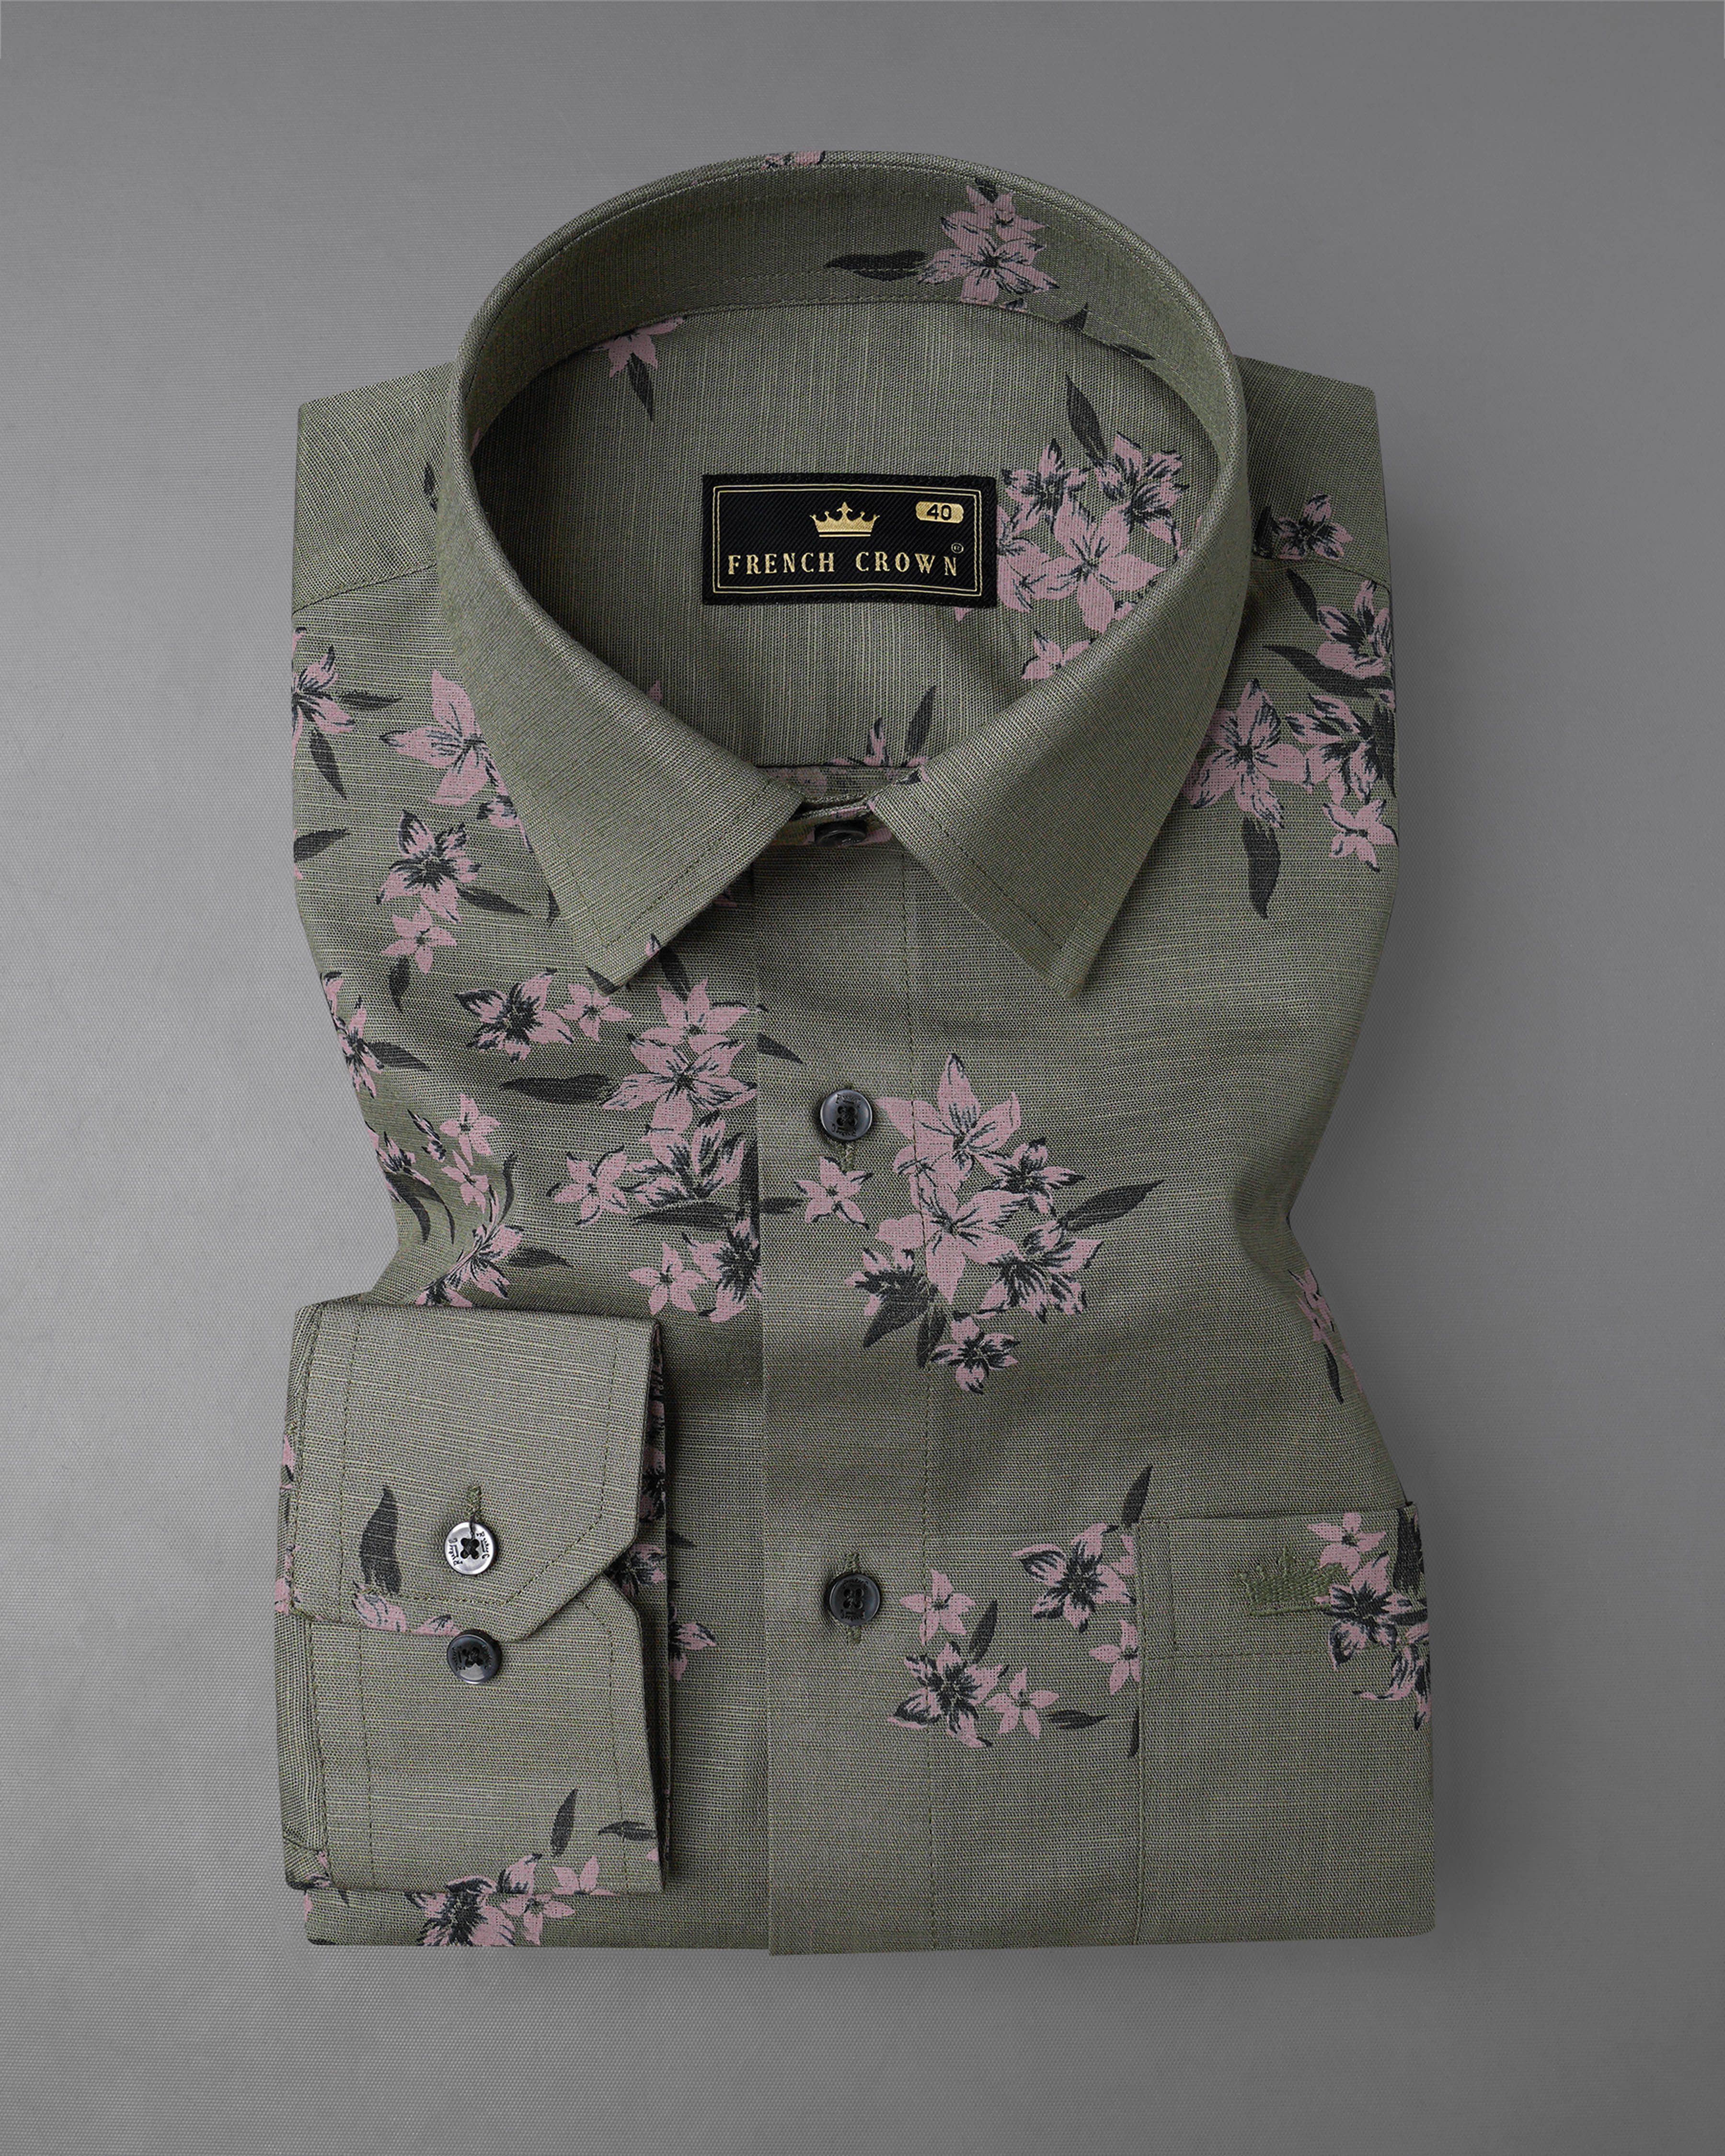 Fuscous Green With Floral Printed Luxurious Linen Shirt 8074-BLK-38, 8074-BLK-H-38, 8074-BLK-39, 8074-BLK-H-39, 8074-BLK-40, 8074-BLK-H-40, 8074-BLK-42, 8074-BLK-H-42, 8074-BLK-44, 8074-BLK-H-44, 8074-BLK-46, 8074-BLK-H-46, 8074-BLK-48, 8074-BLK-H-48, 8074-BLK-50, 8074-BLK-H-50, 8074-BLK-52, 8074-BLK-H-52